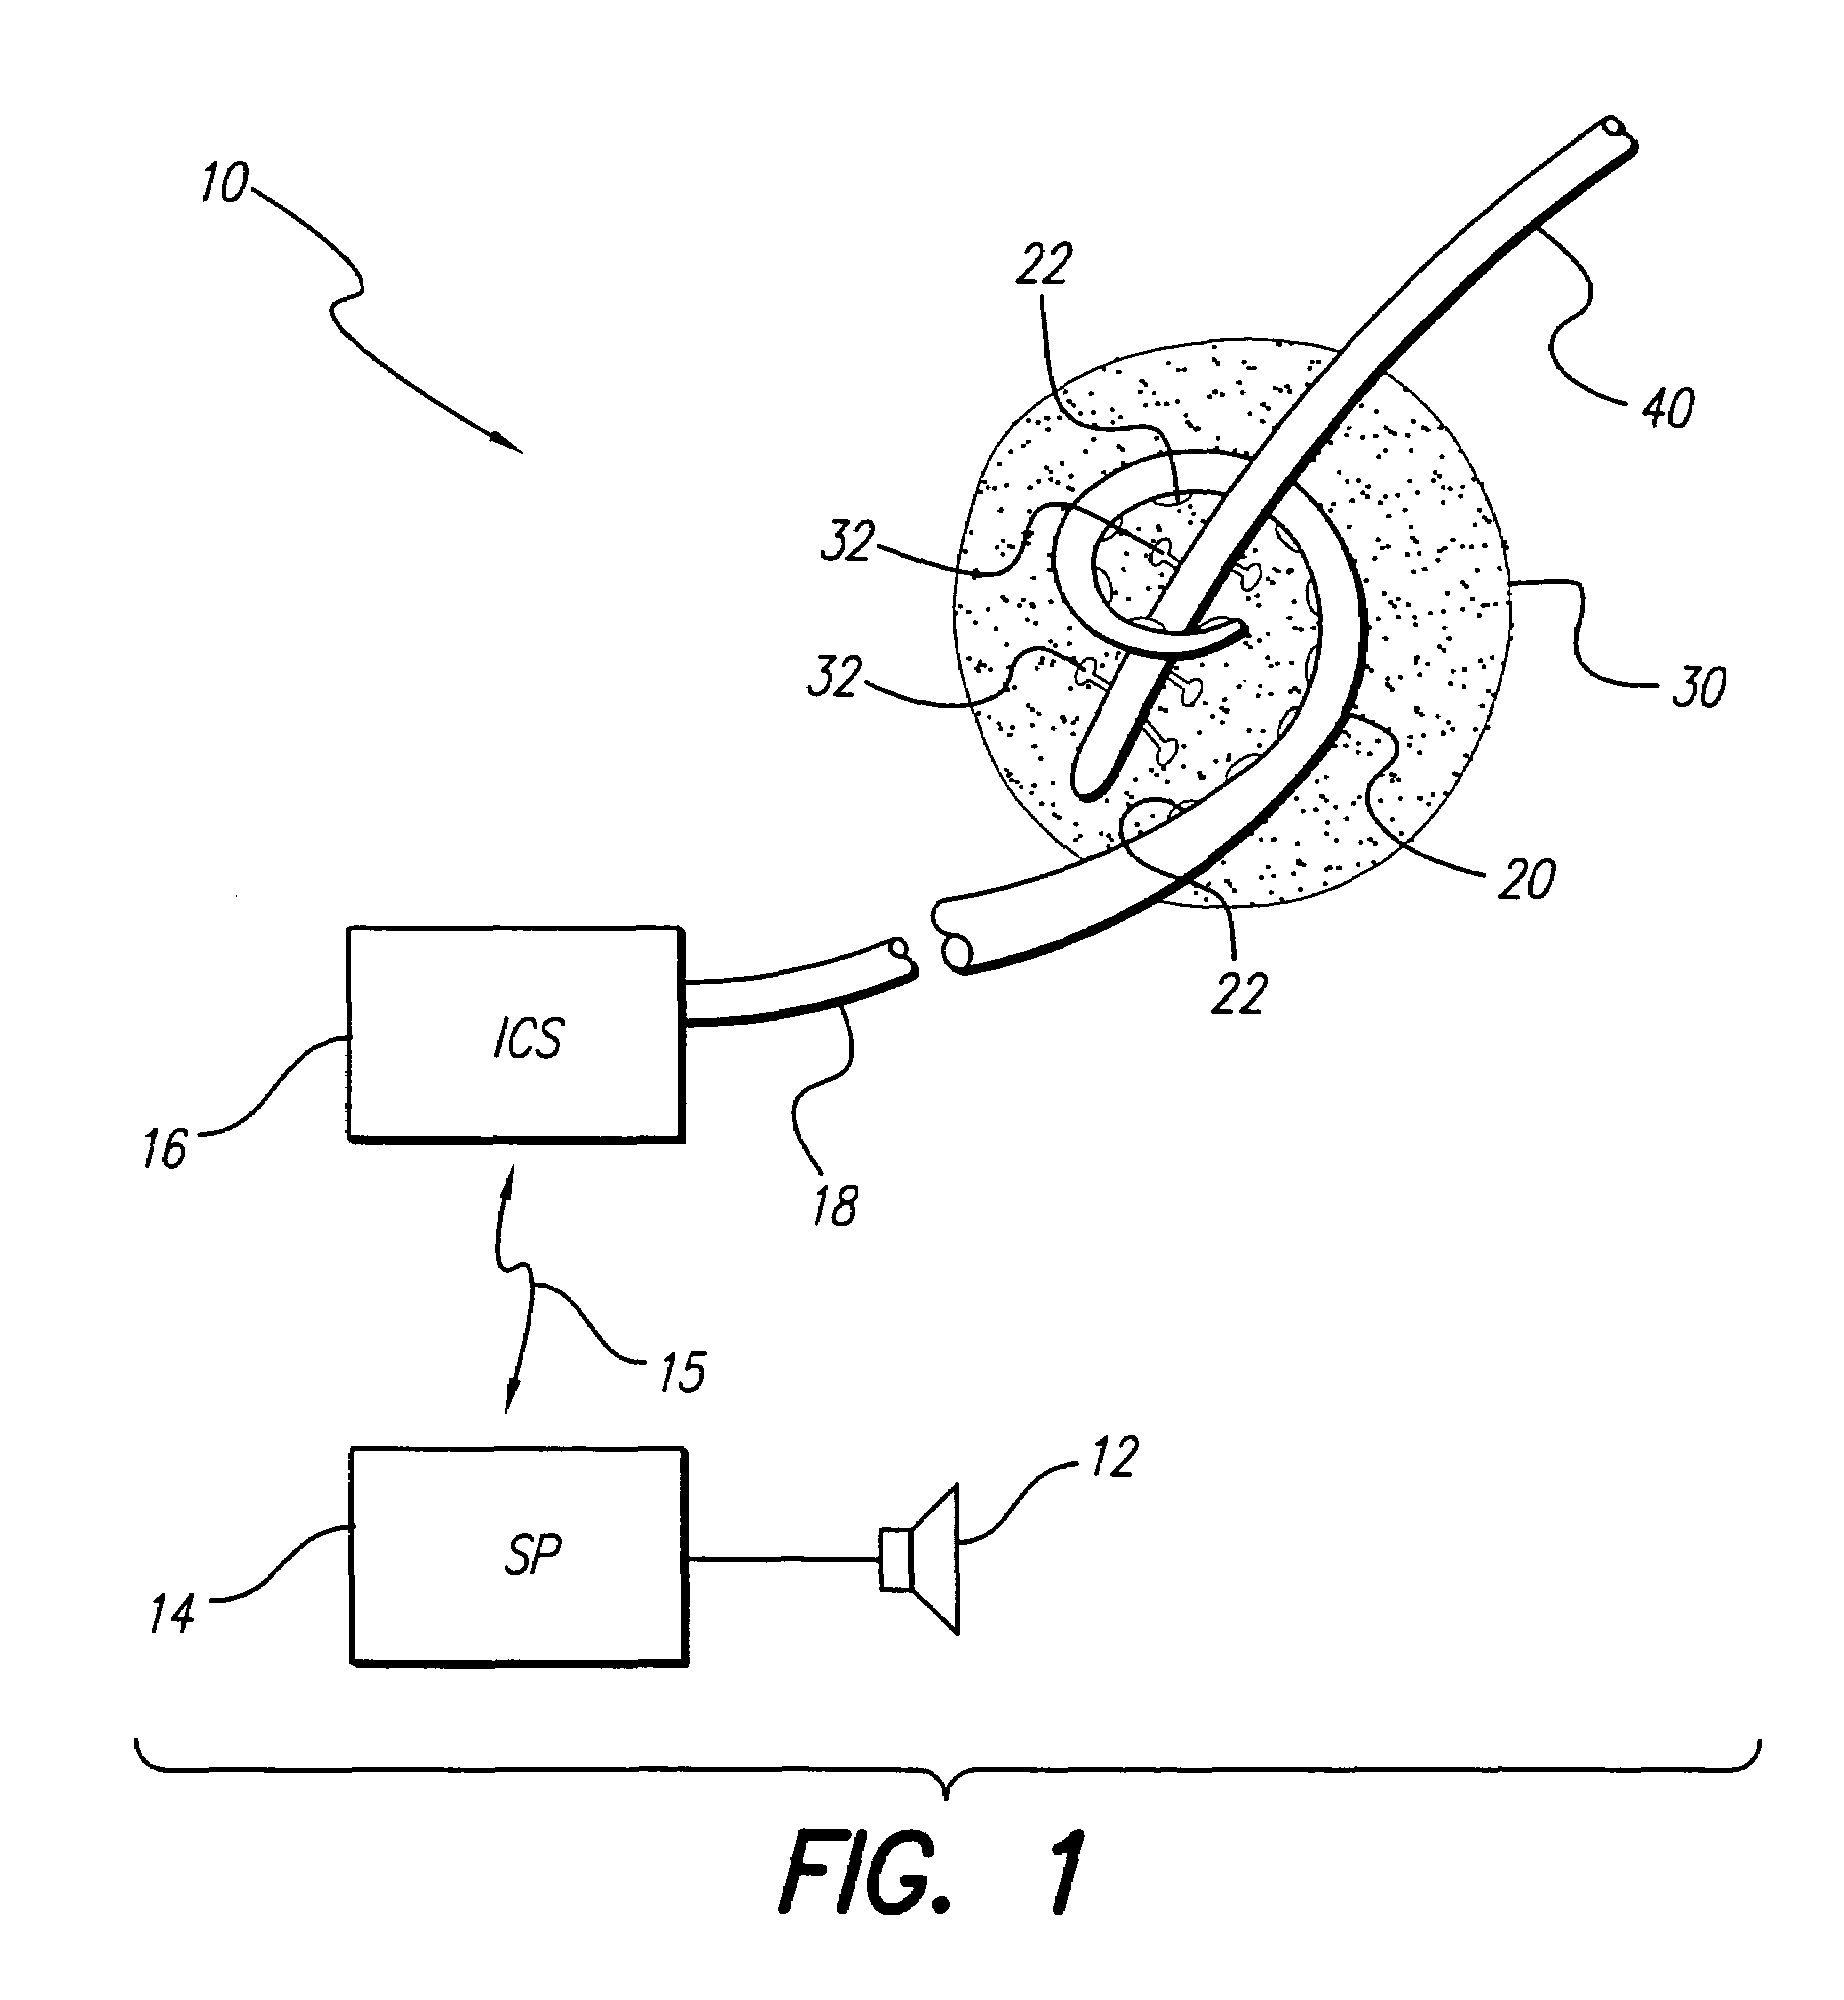 System and method for using a multi-contact electrode to stimulate the cochlear nerve or other body tissue